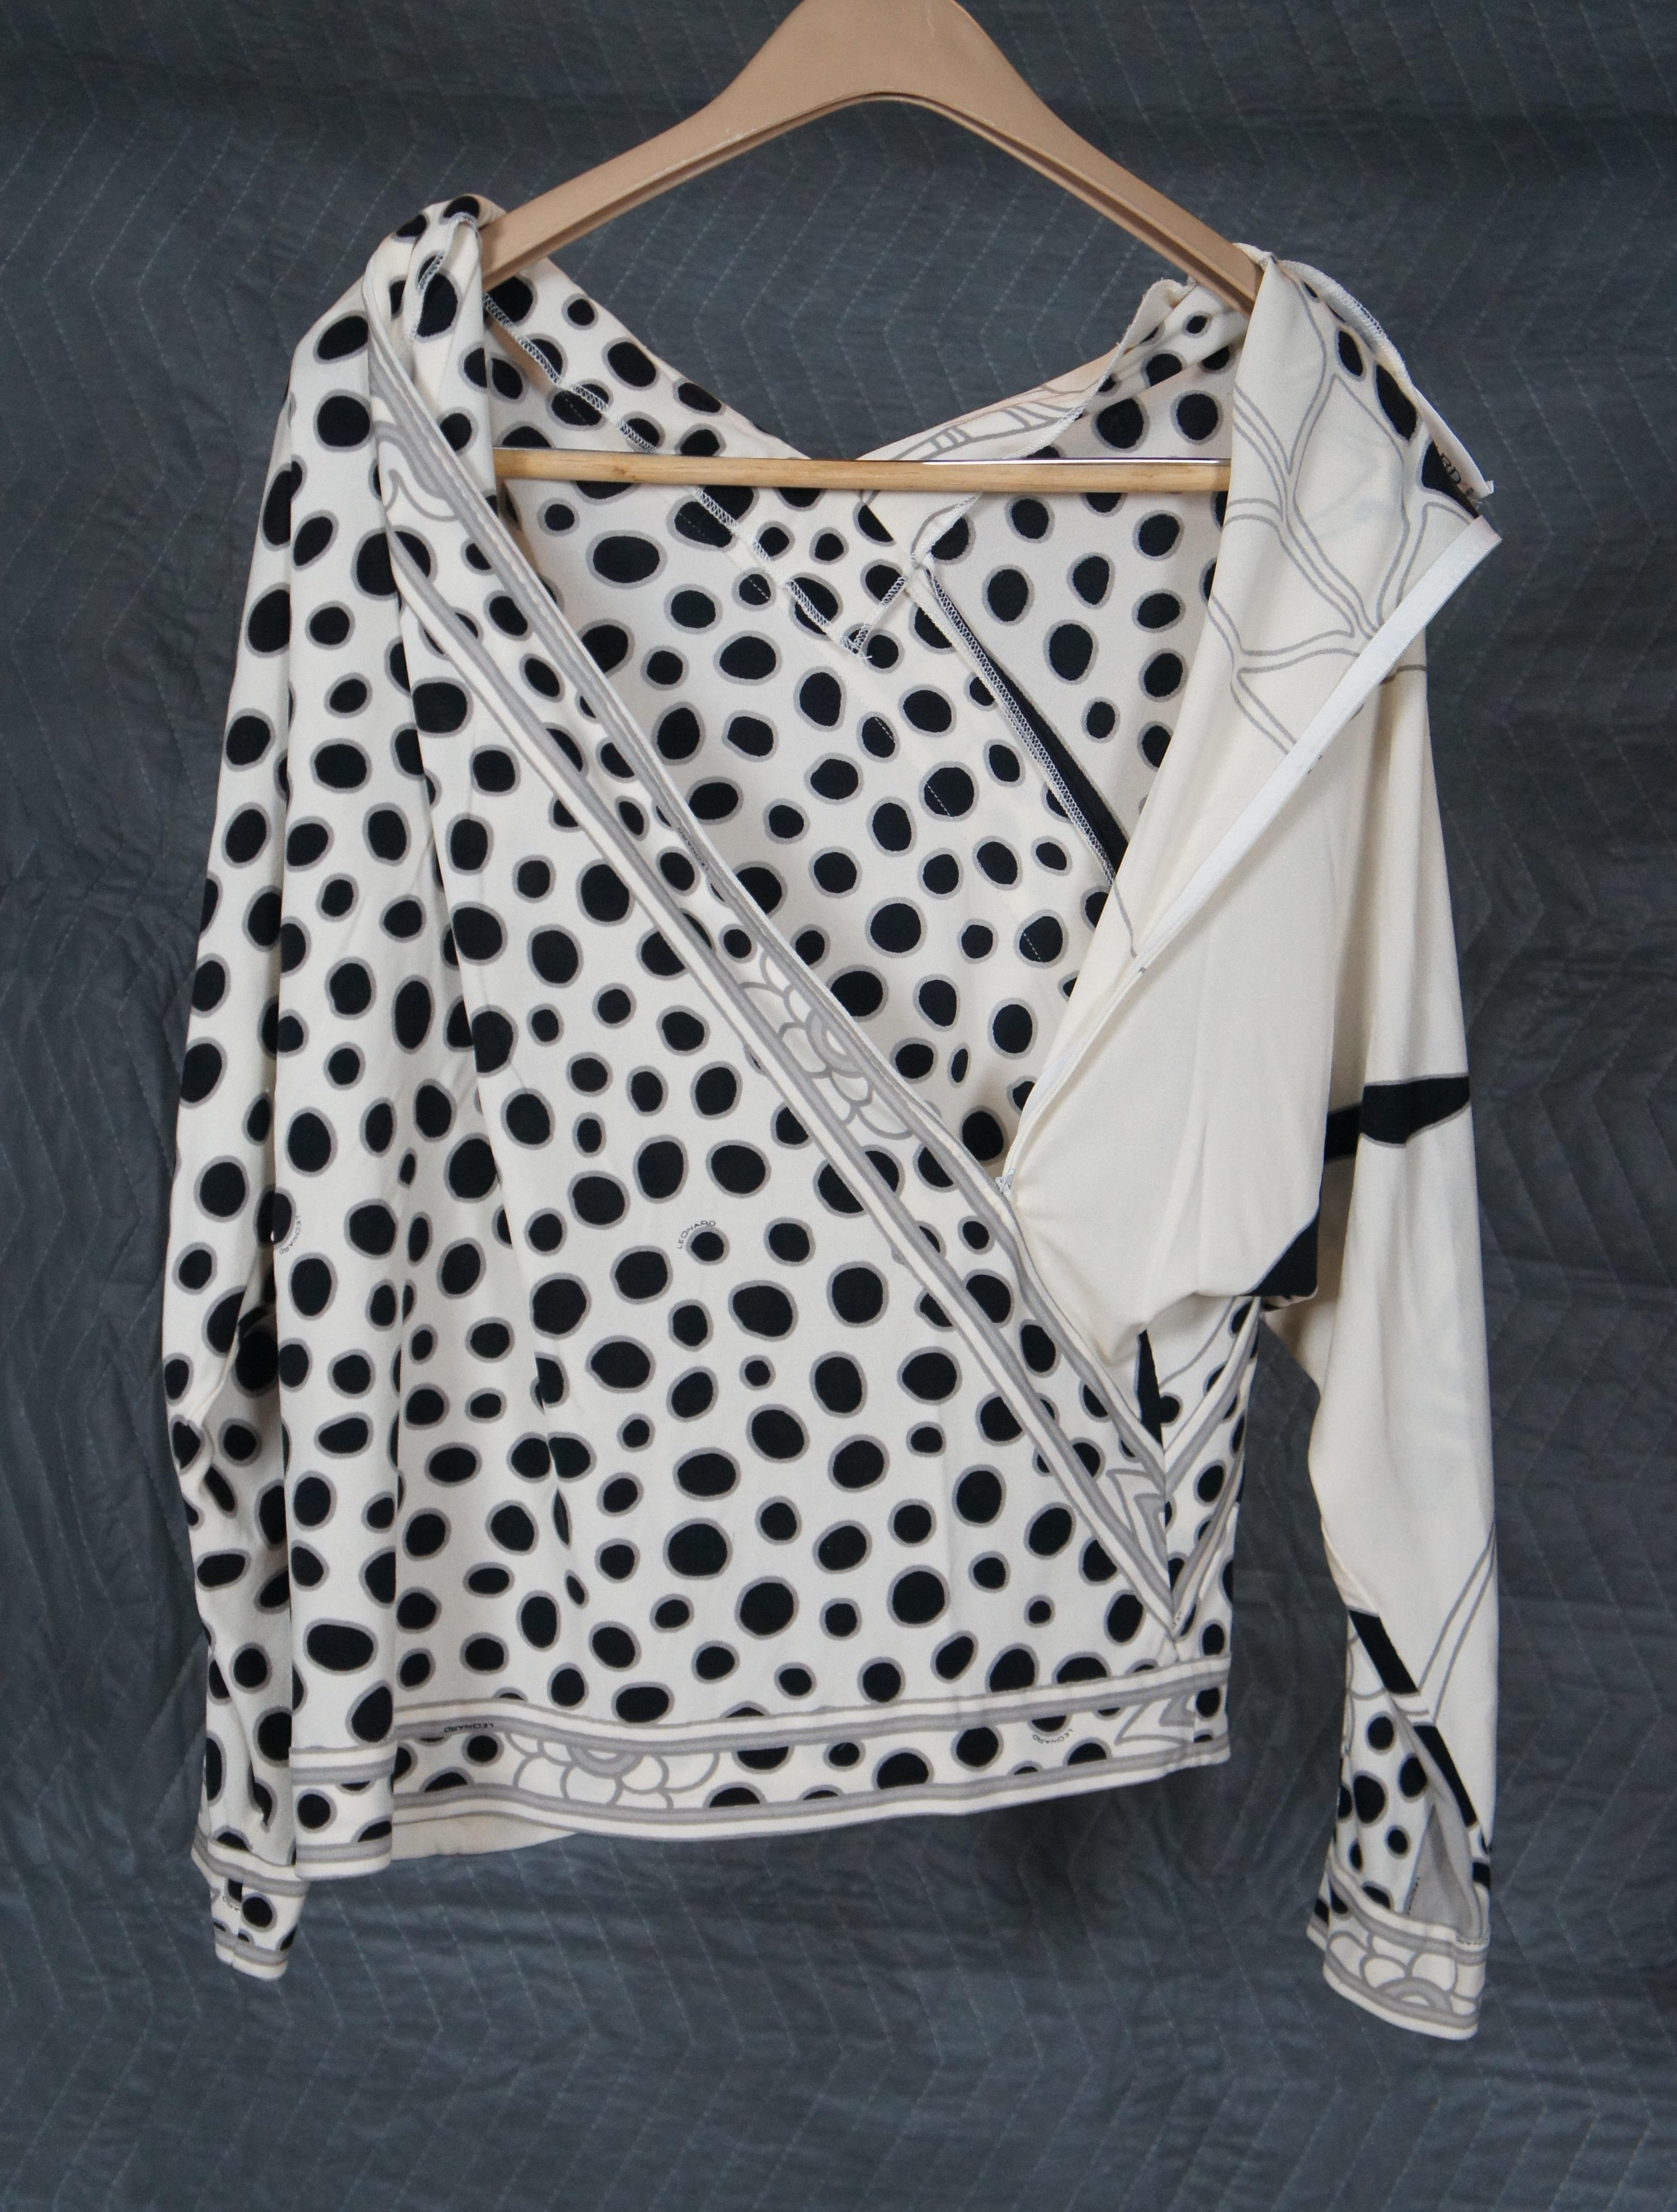 Vintage Leonard Studio Paris France Cross Zip Black & White Spotted Blouse In Good Condition For Sale In Dayton, OH